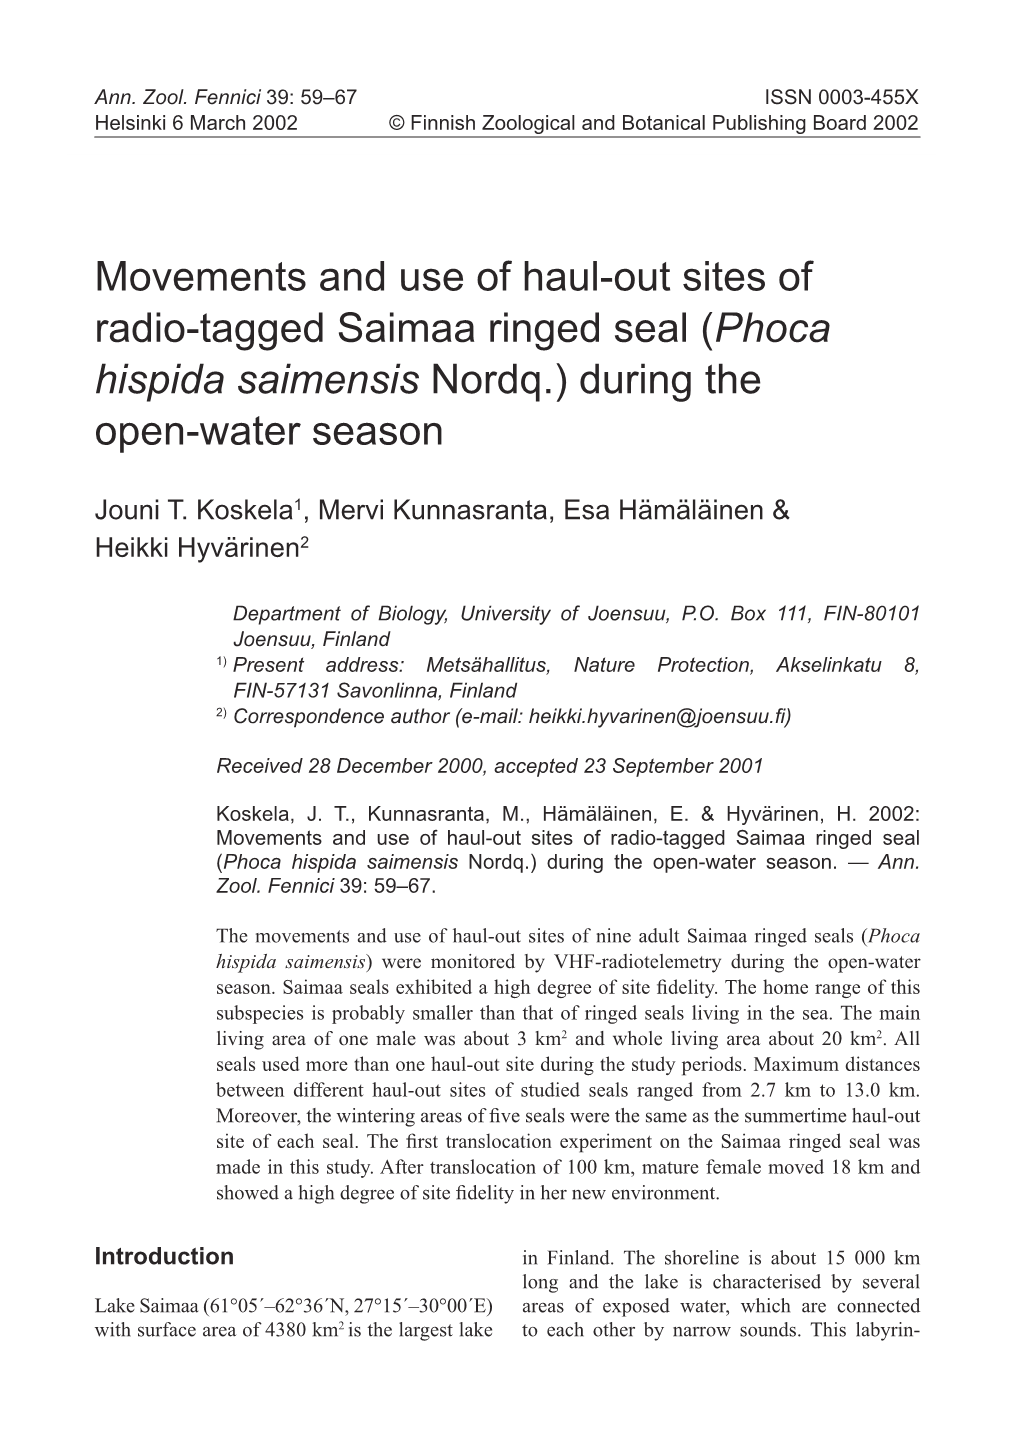 Movements and Use of Haul-Out Sites of Radio-Tagged Saimaa Ringed Seal (Phoca Hispida Saimensis Nordq.) During the Open-Water Season